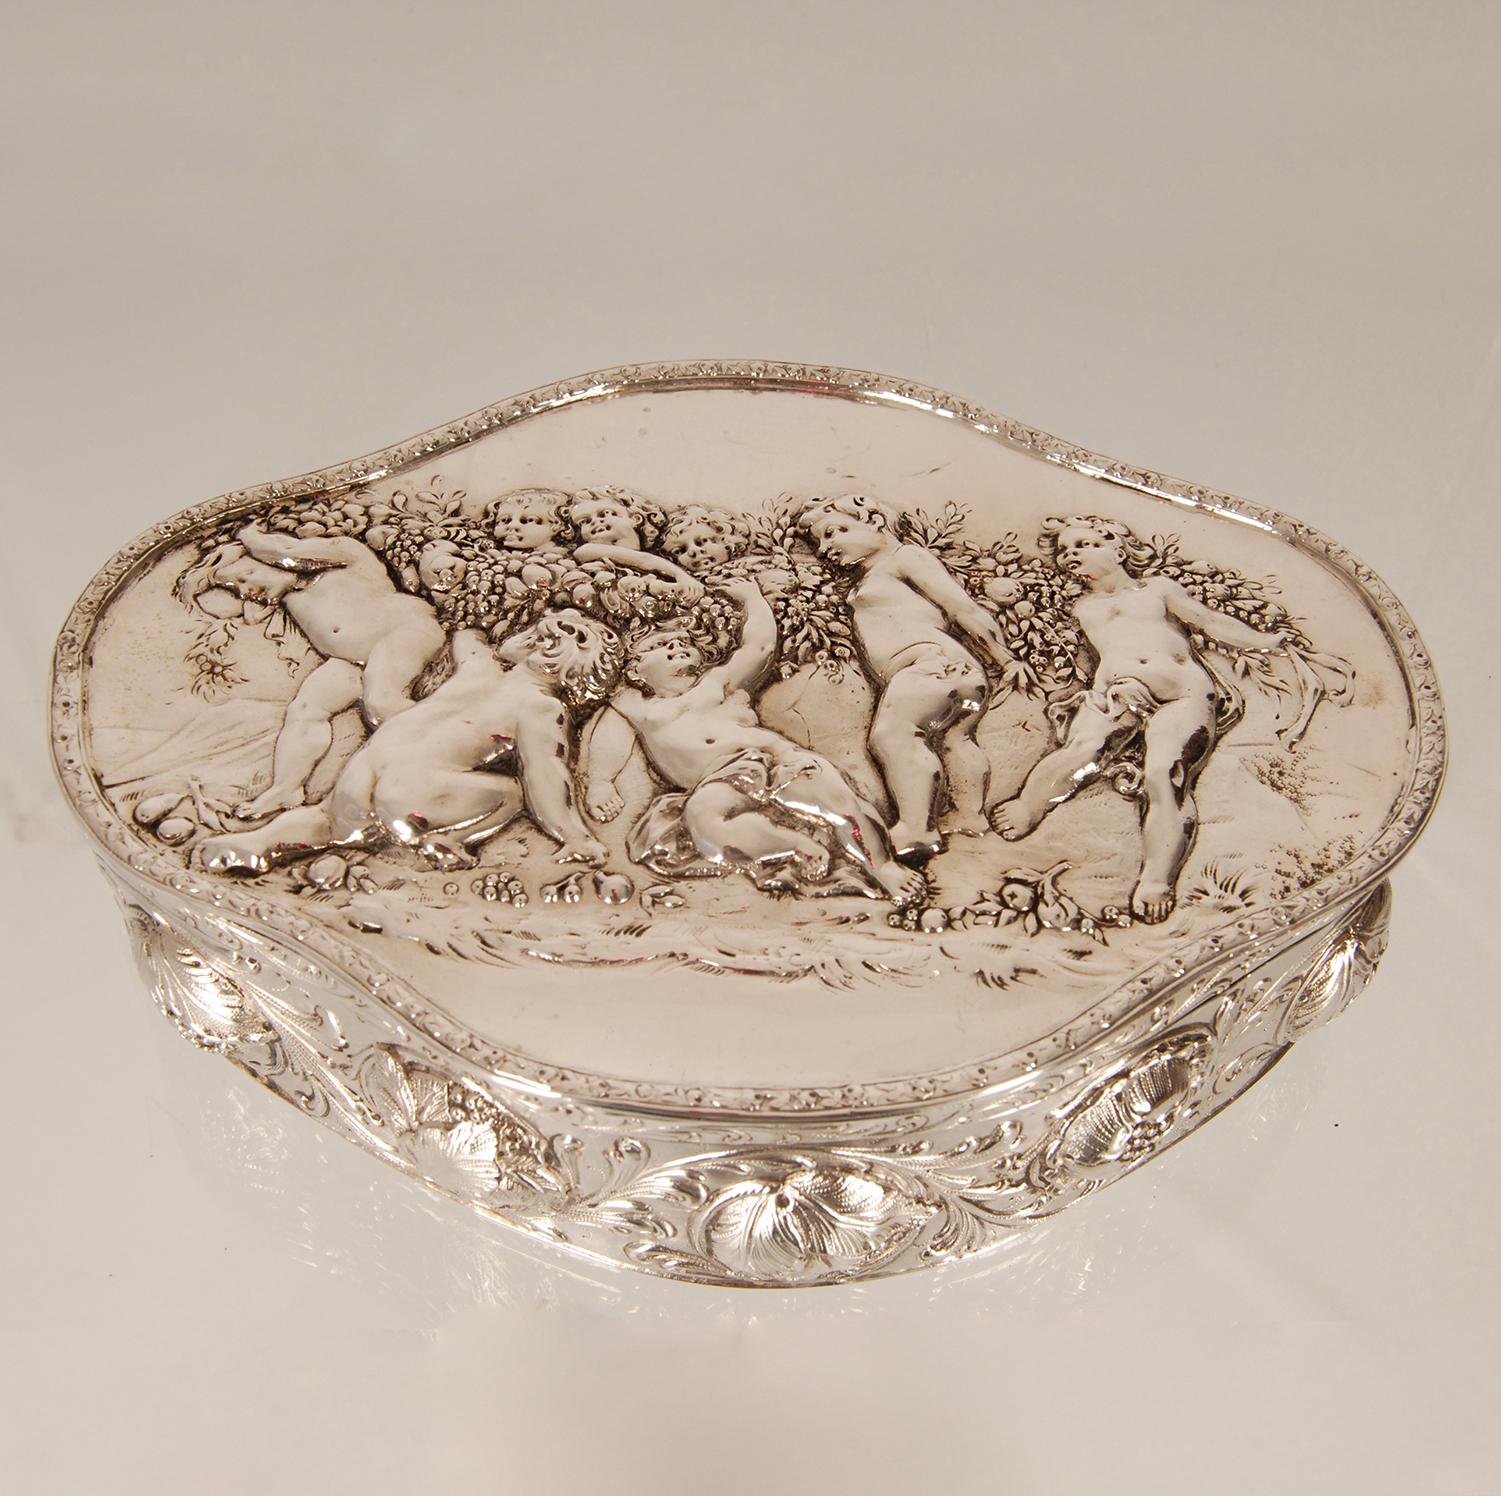 Hanau Silver Jewelry Box J.D.Schleissner and Sons Antique German Casket Putto For Sale 6